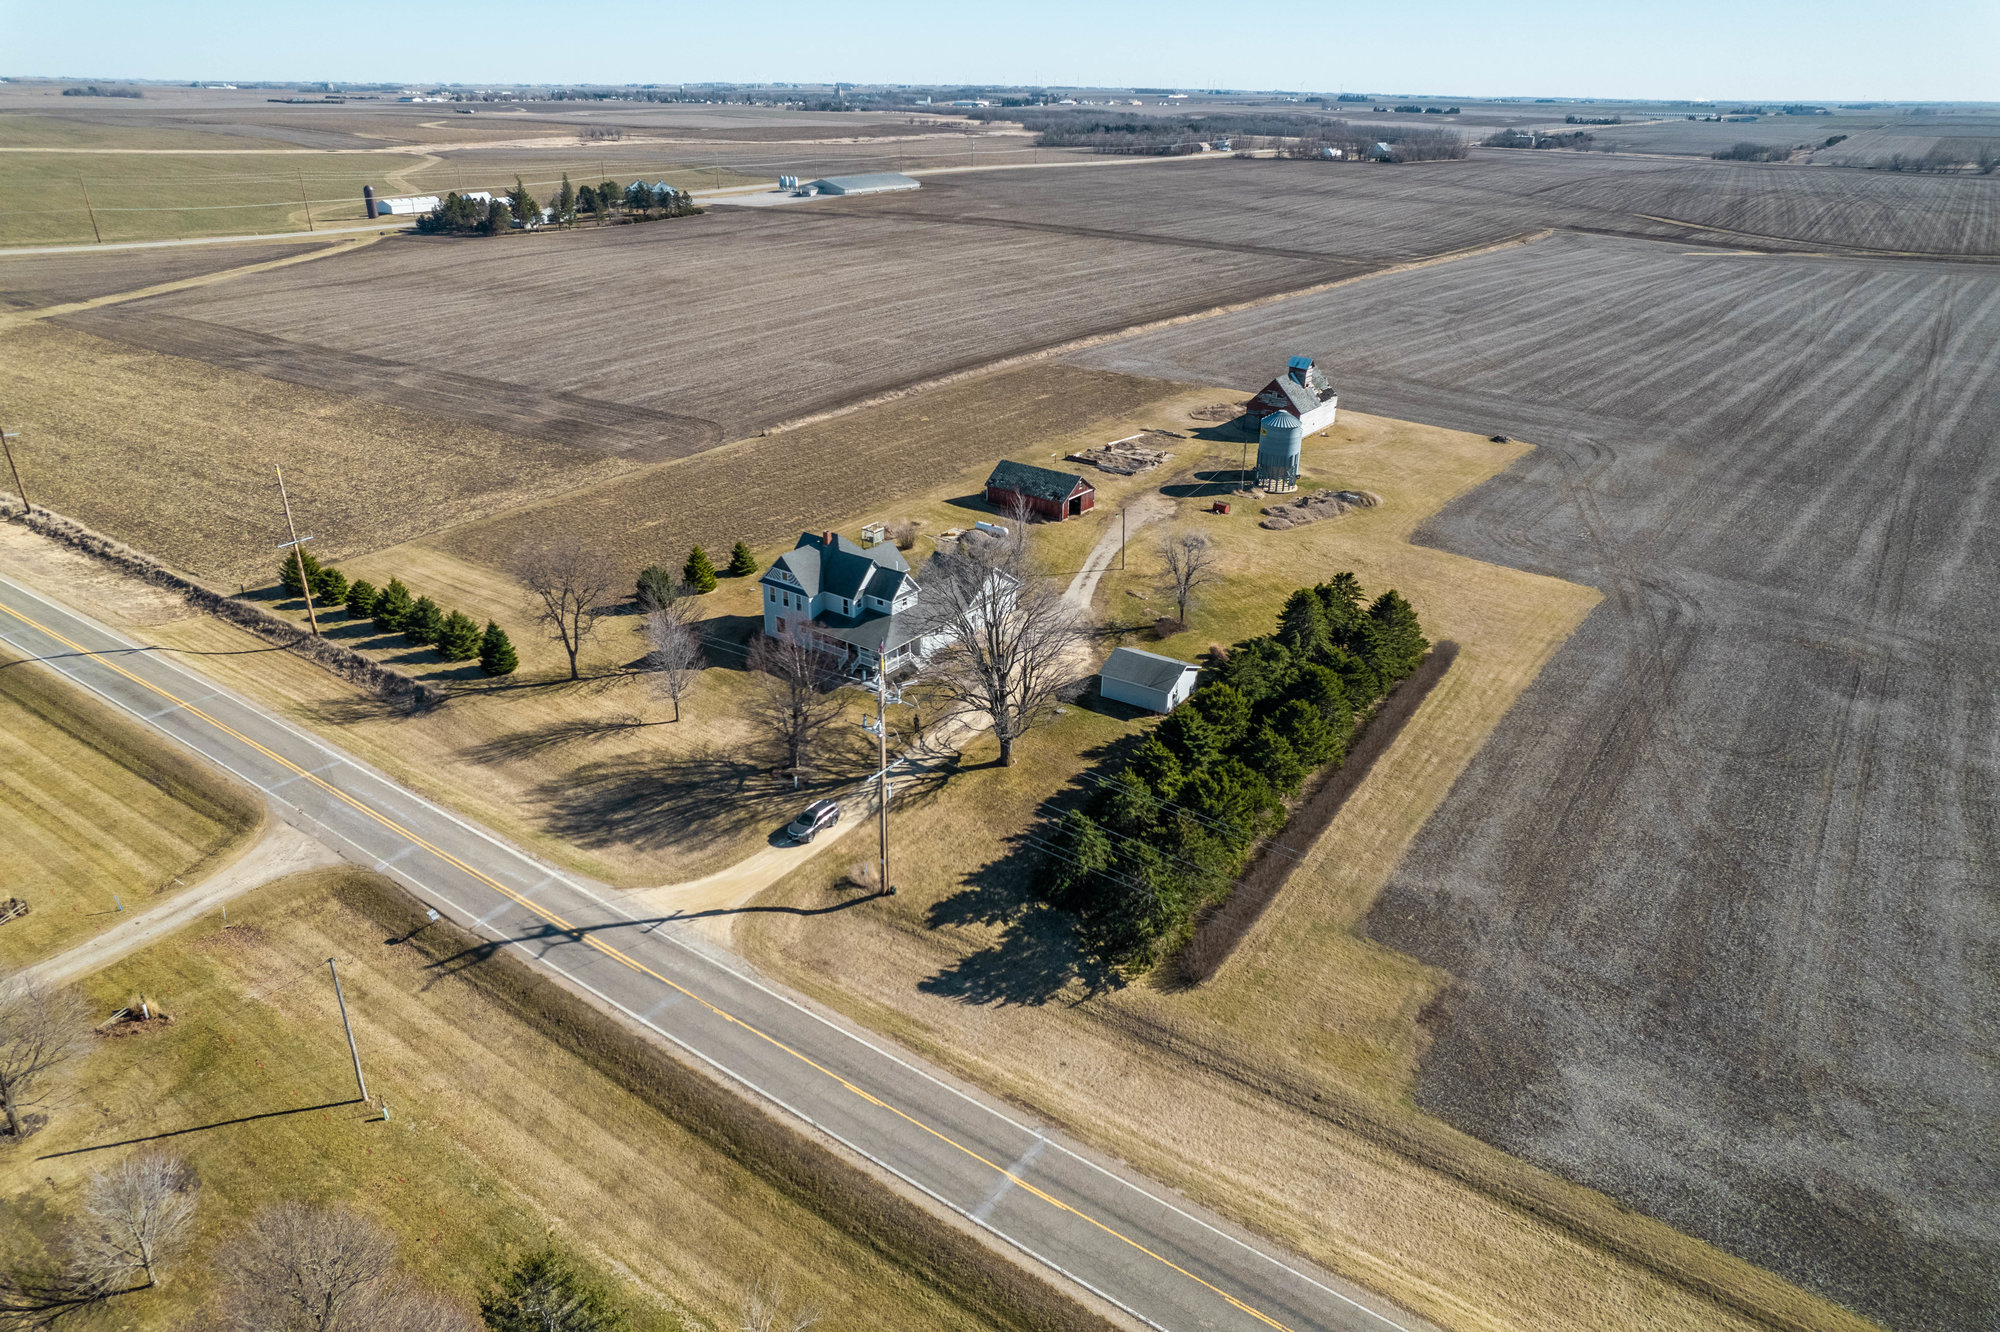 Take a Look at This Grundy County Acreage with a Beautiful Character & Updates Located on a Solid Surface Road